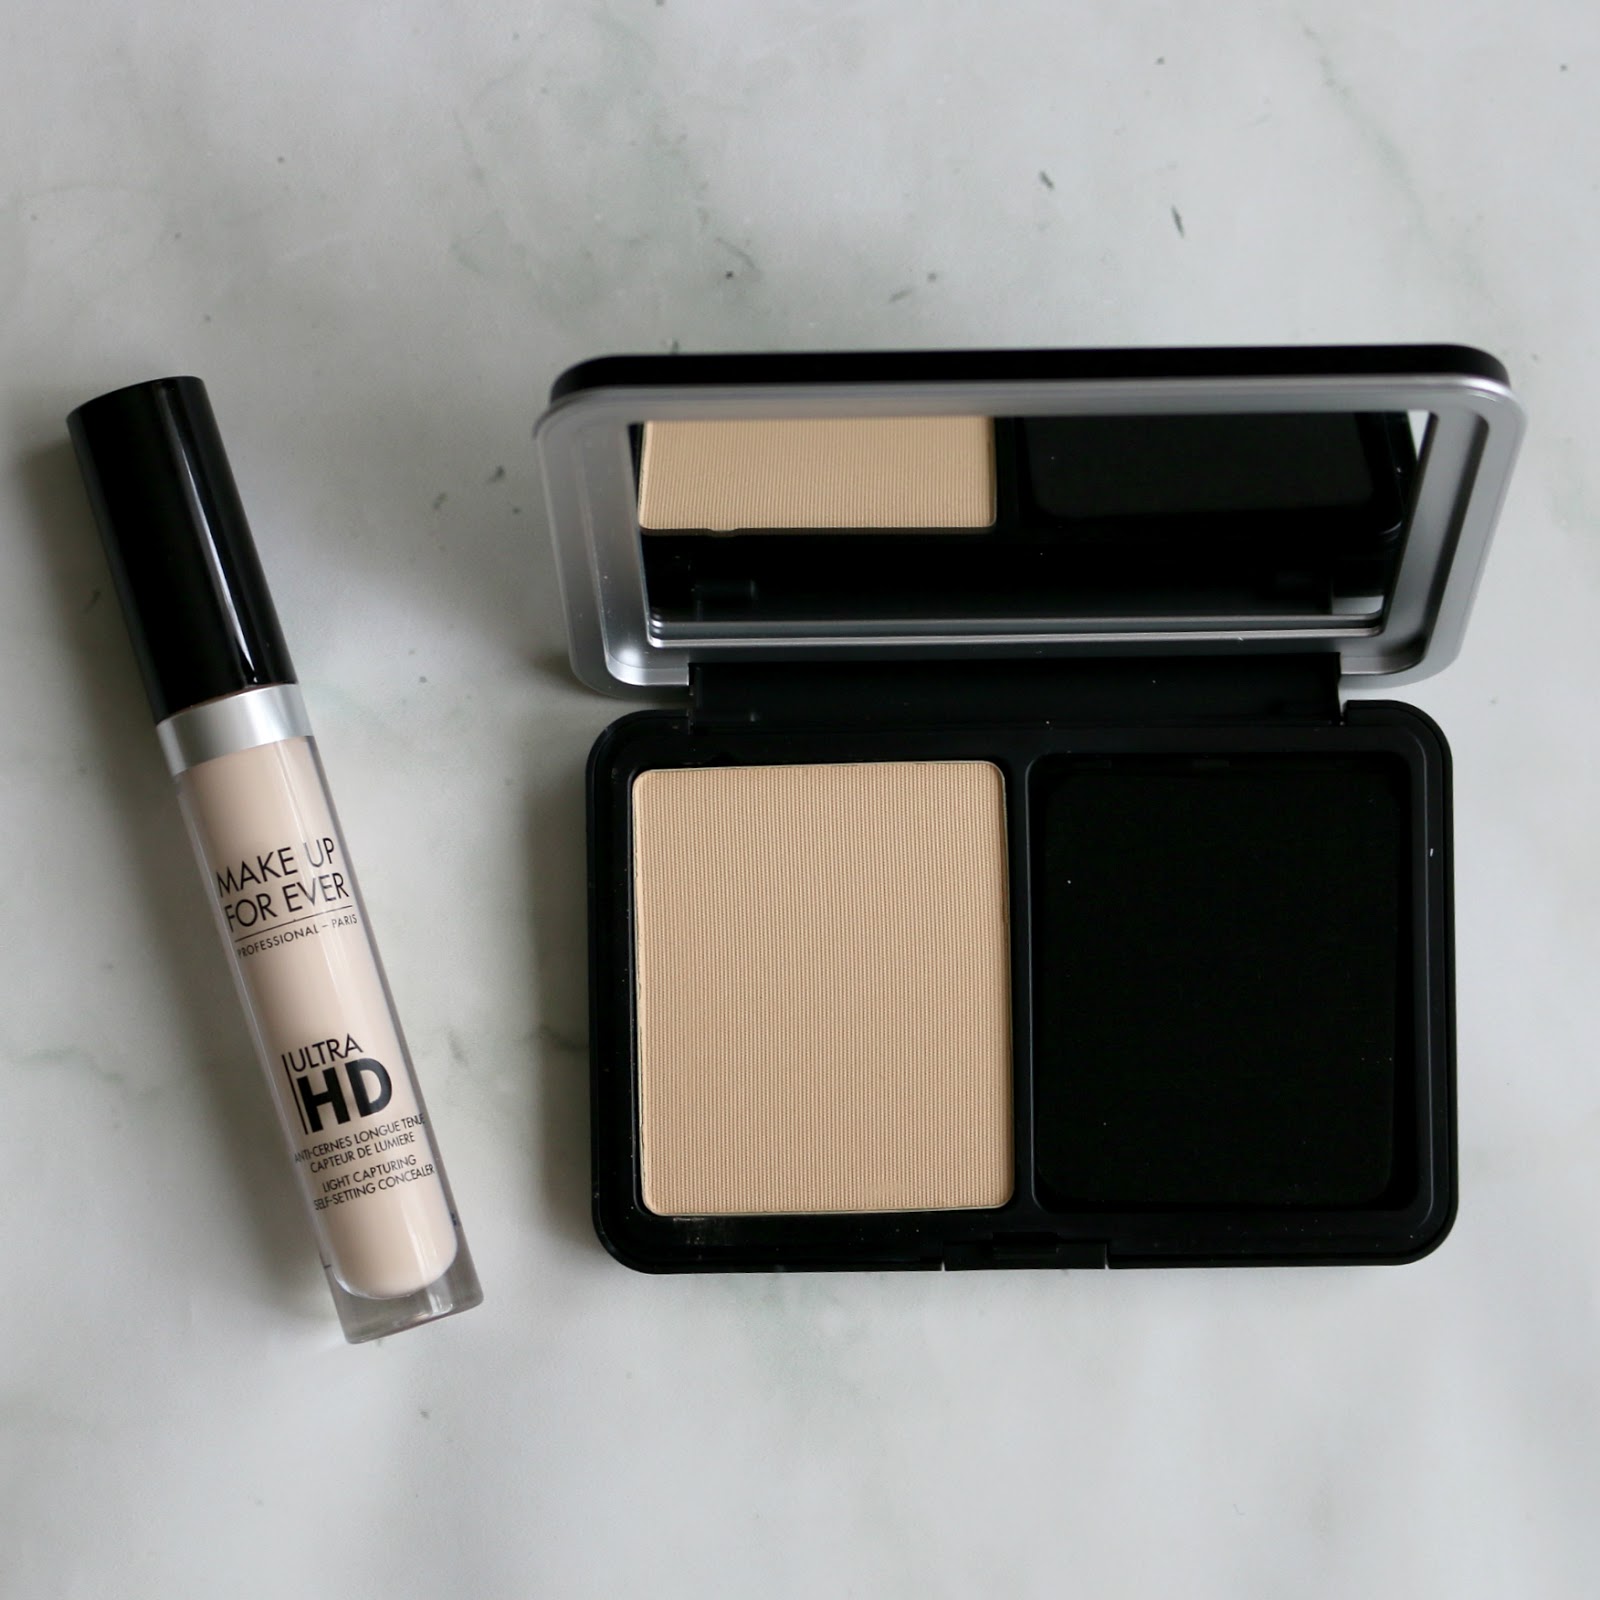 Makeup forever hd skin matte velvet powder foundation in 2n22 review – The  Olive Unicorn Beauty Review